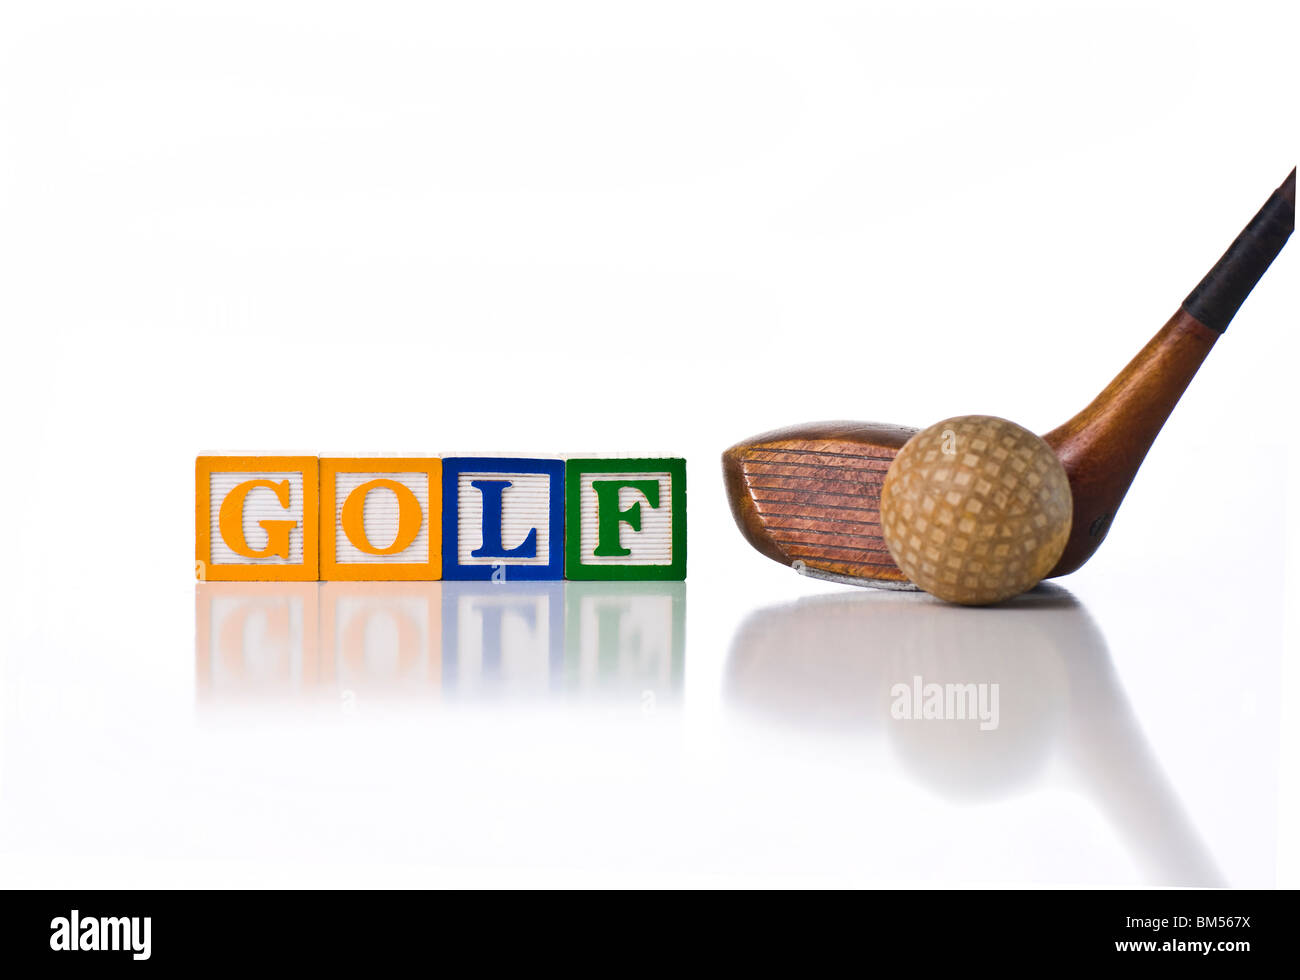 Colorful children's blocks spelling GOLF with antique golf ball and wooden driver Stock Photo